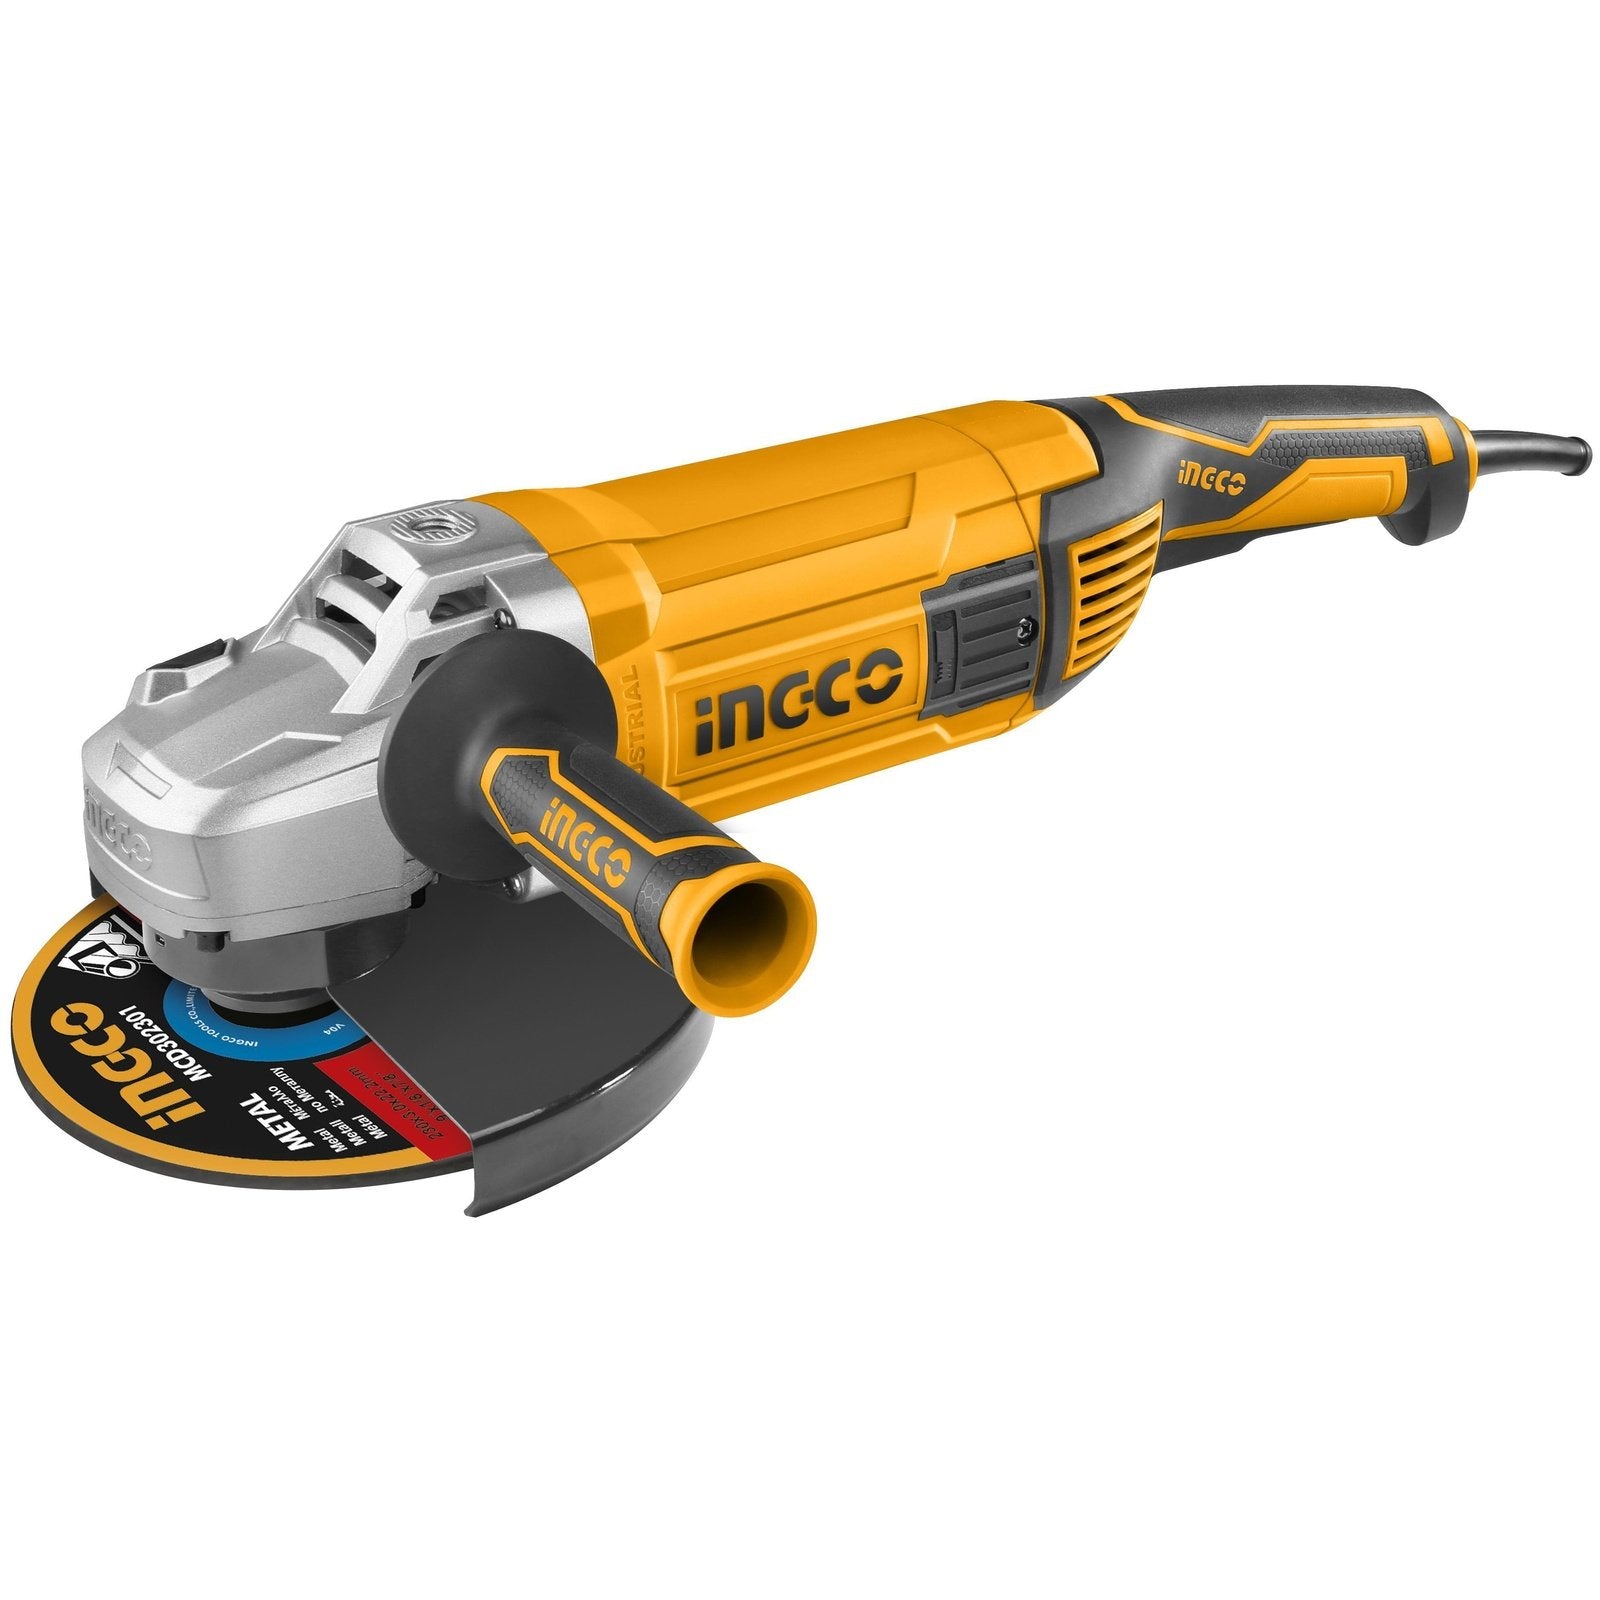 Ingco 9"/230mm Angle Grinder 2600W - AG26008 | Supply Master | Accra, Ghana Tools Building Steel Engineering Hardware tool